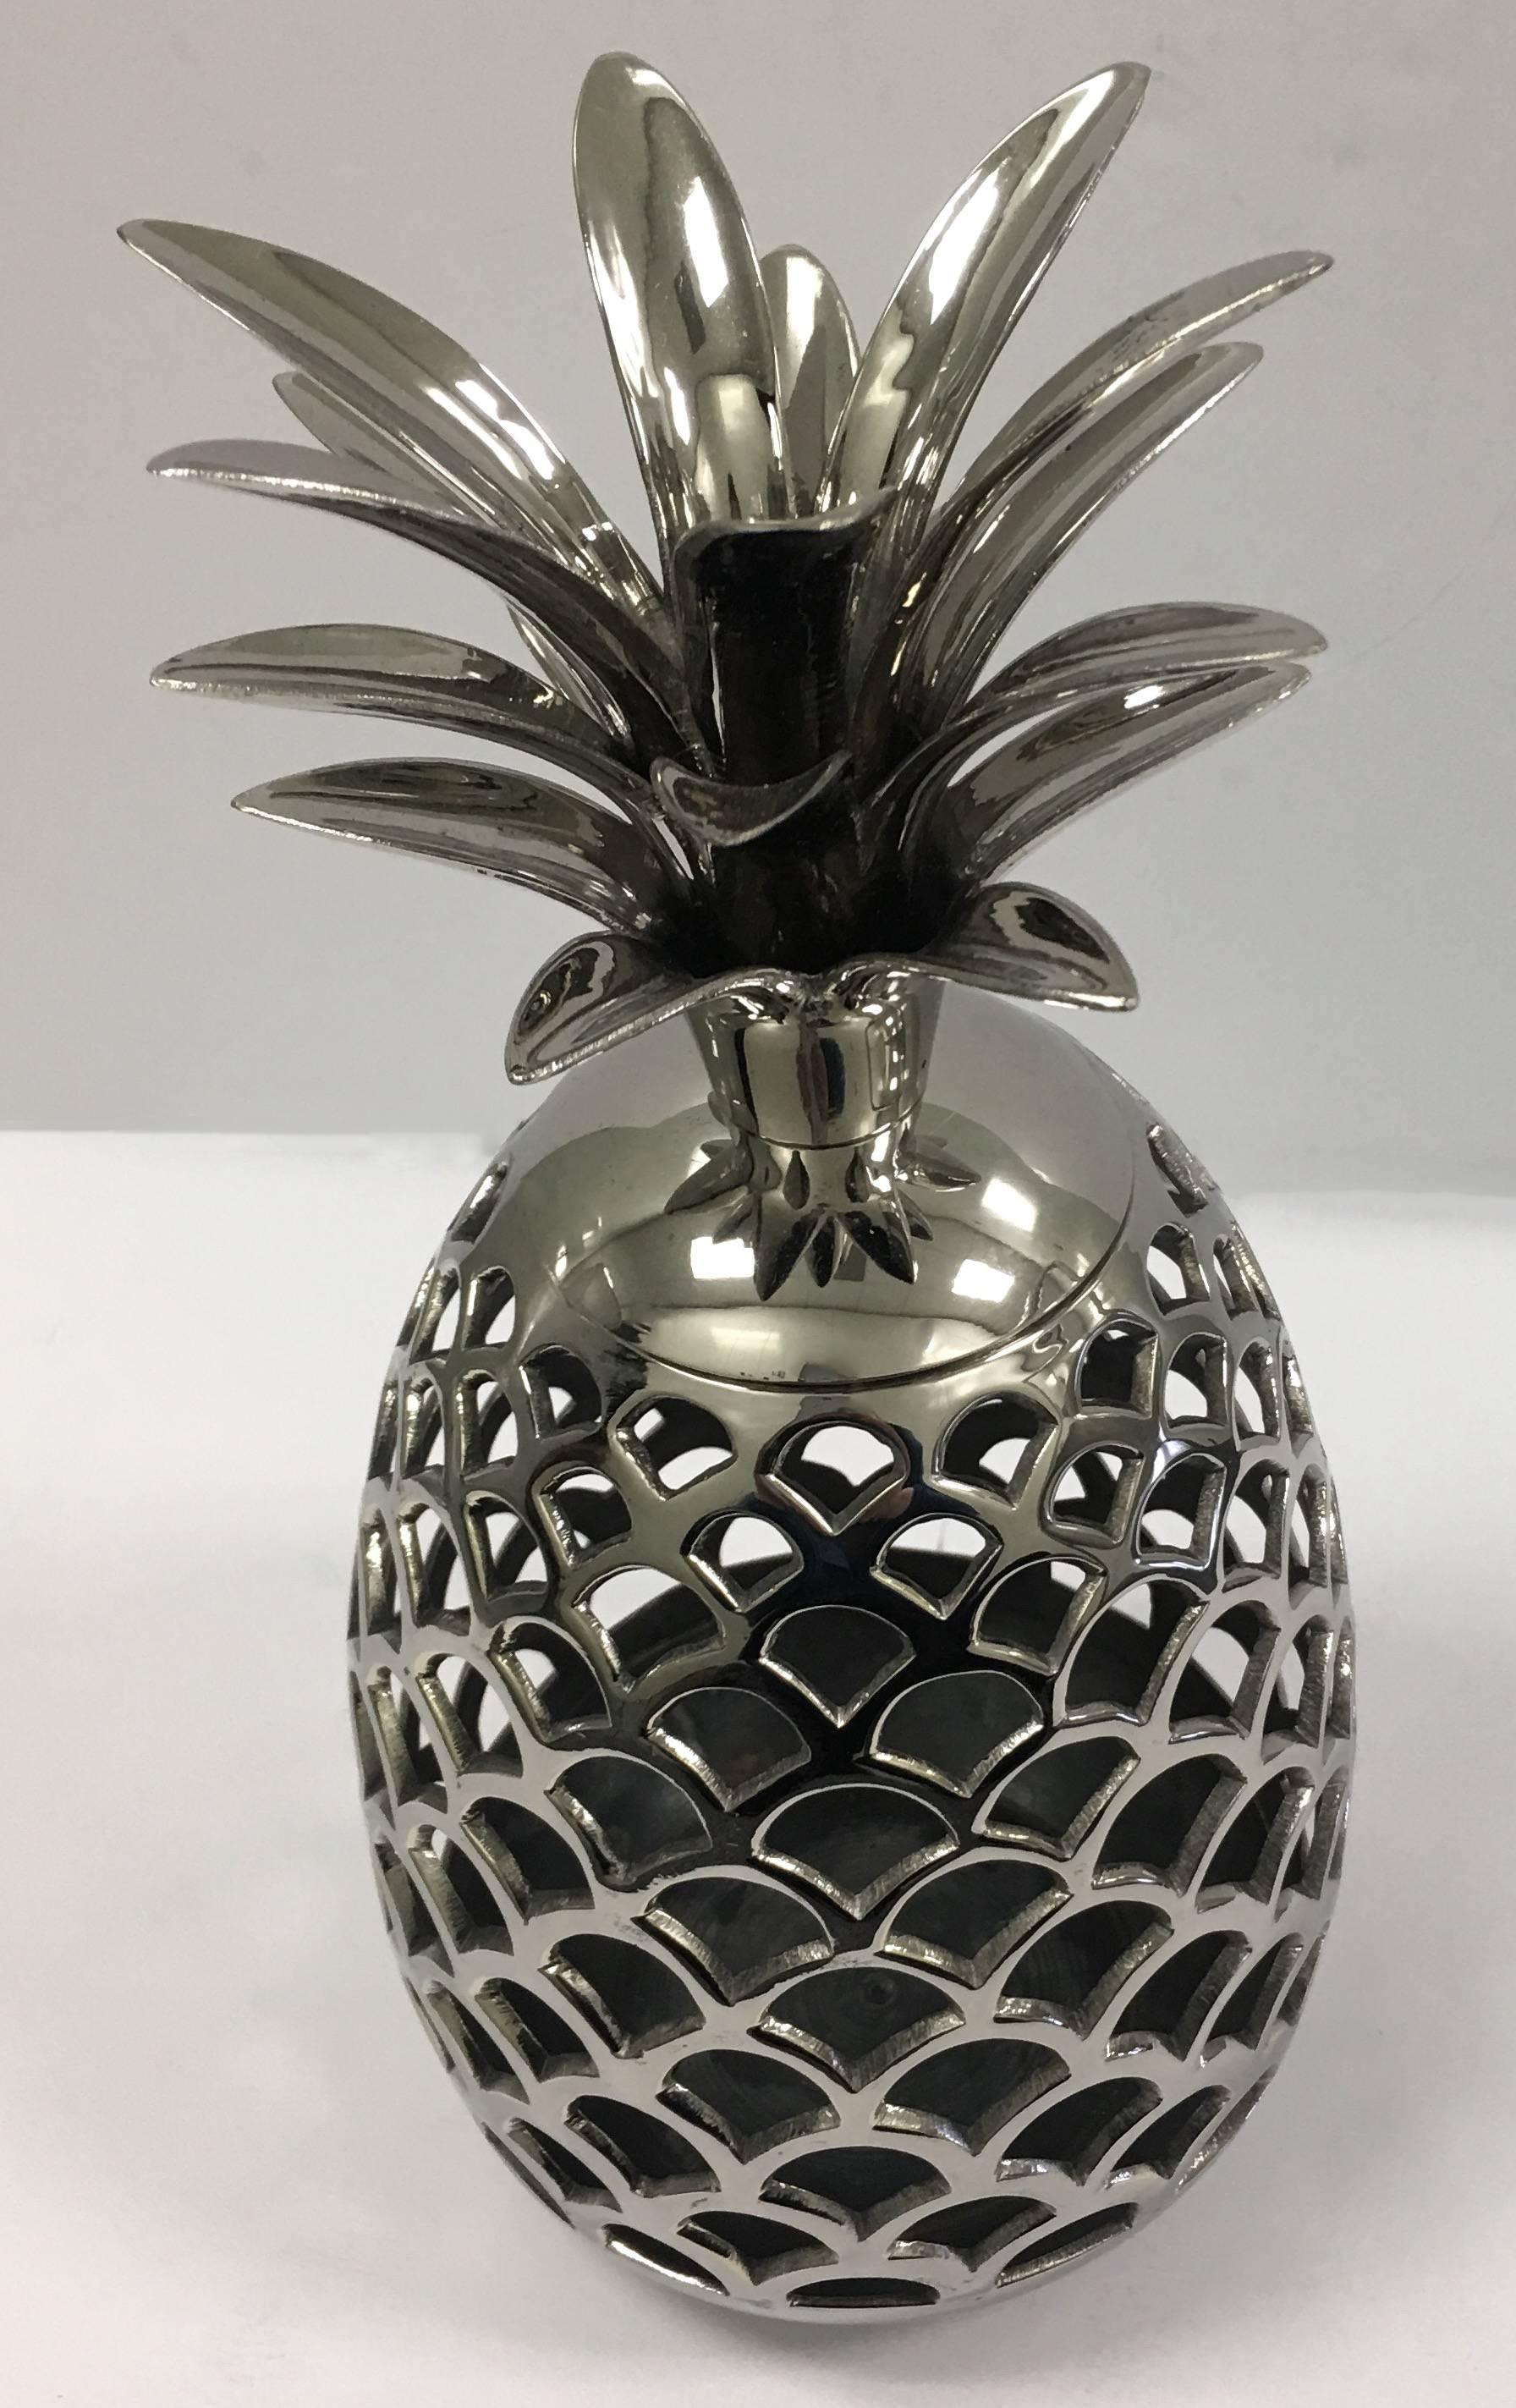 Large pierced pineapple candle holder newly re-plated in polished nickel.